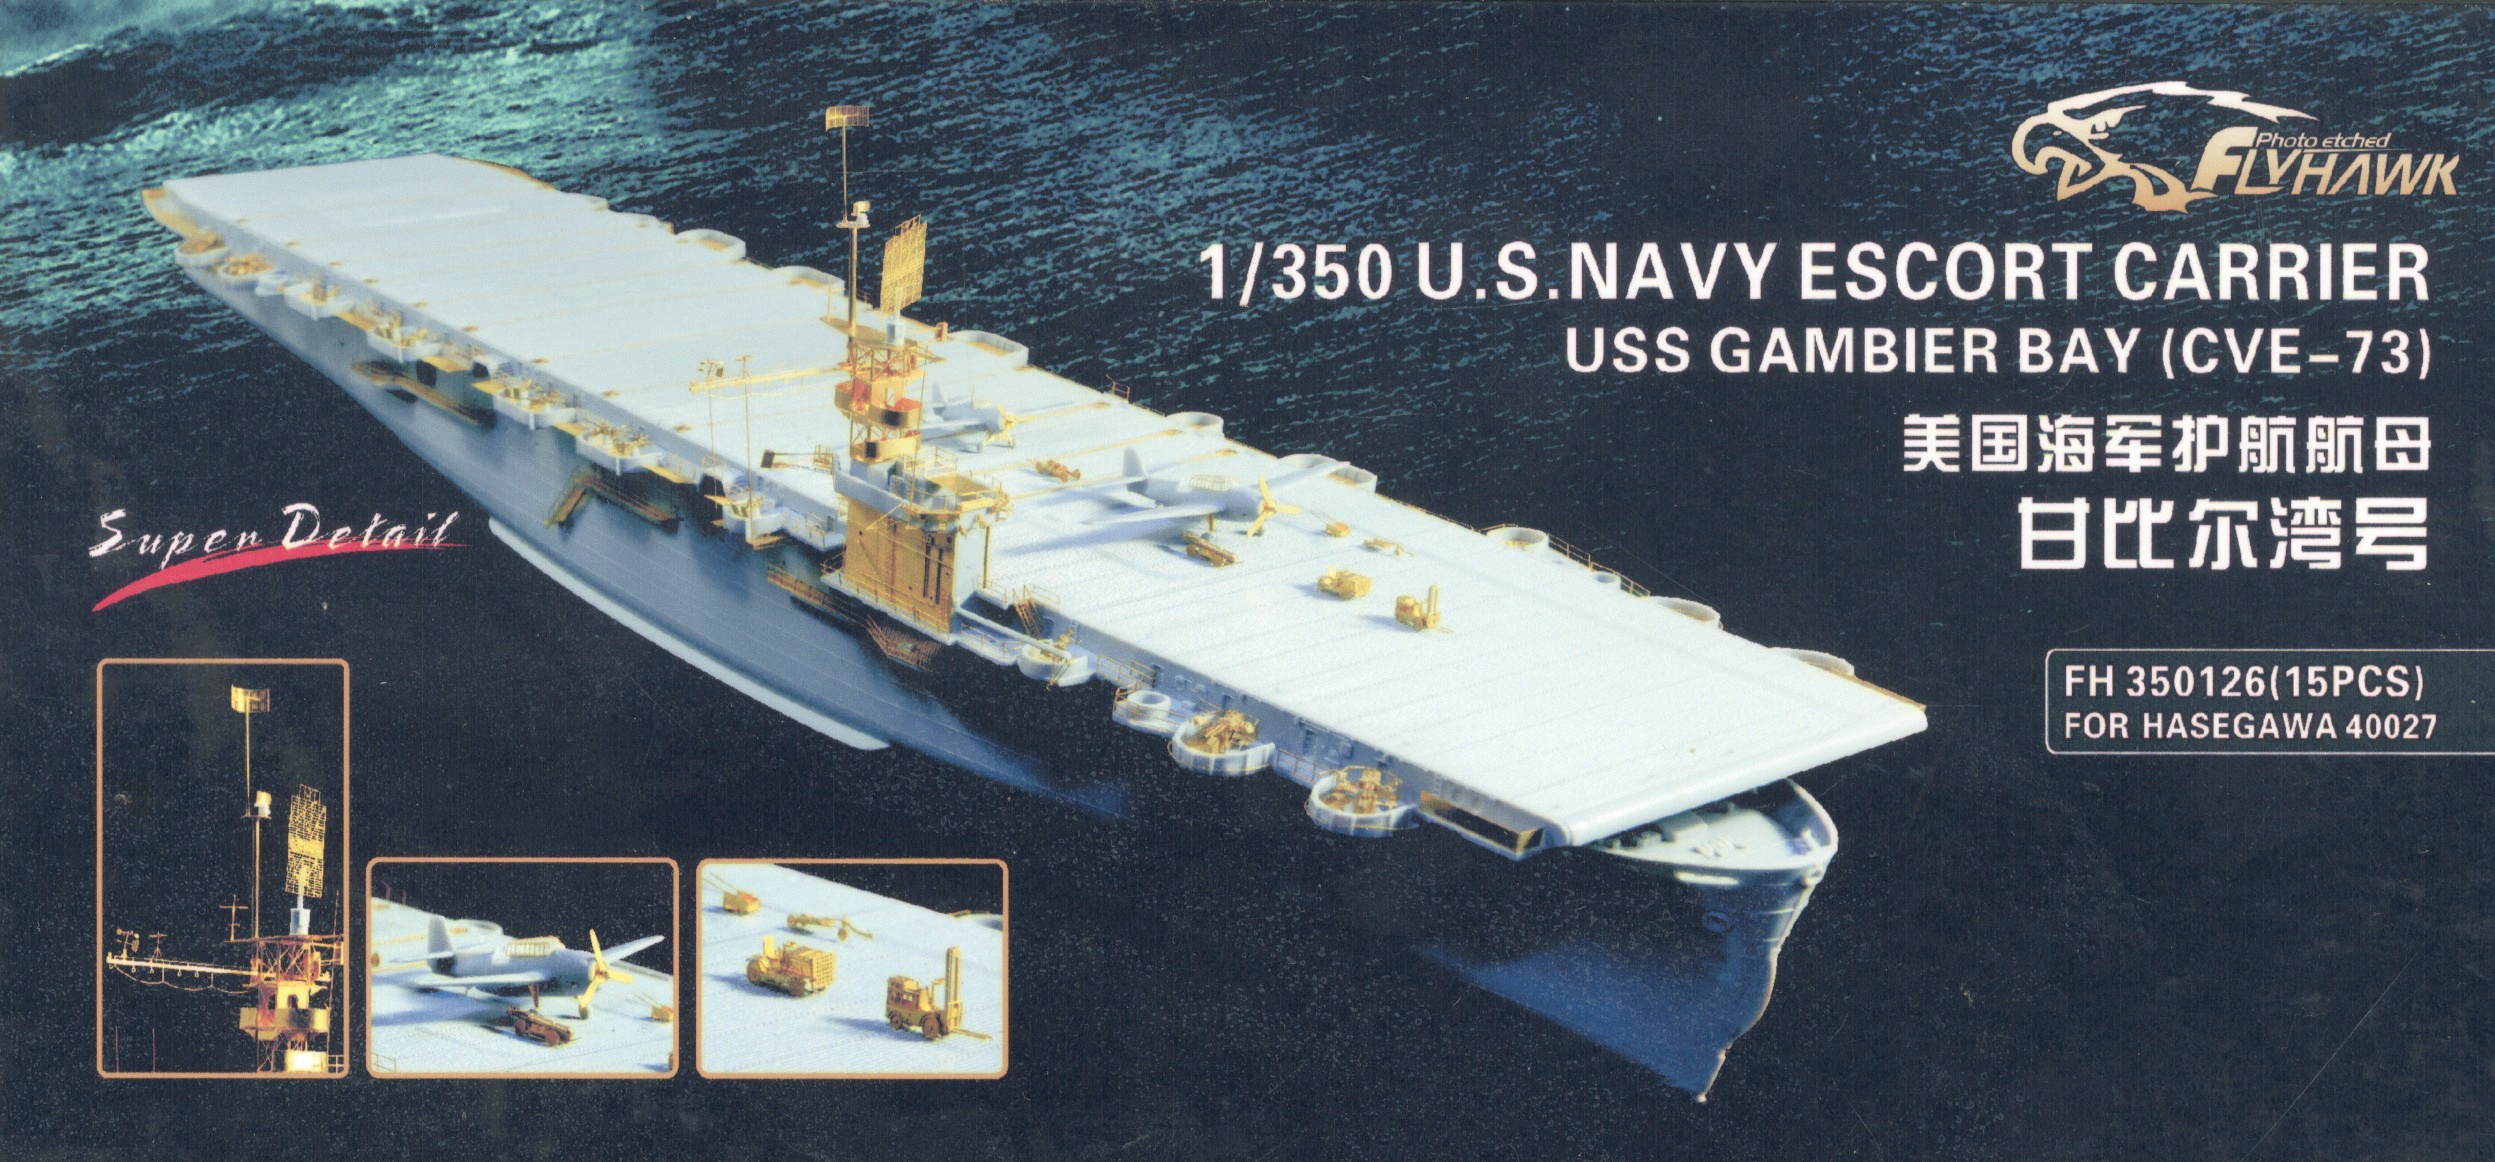 Hasegawa 1/350 Escort Carrier USS Gambier Bay Etching Parts Basic NEW Model Kit 